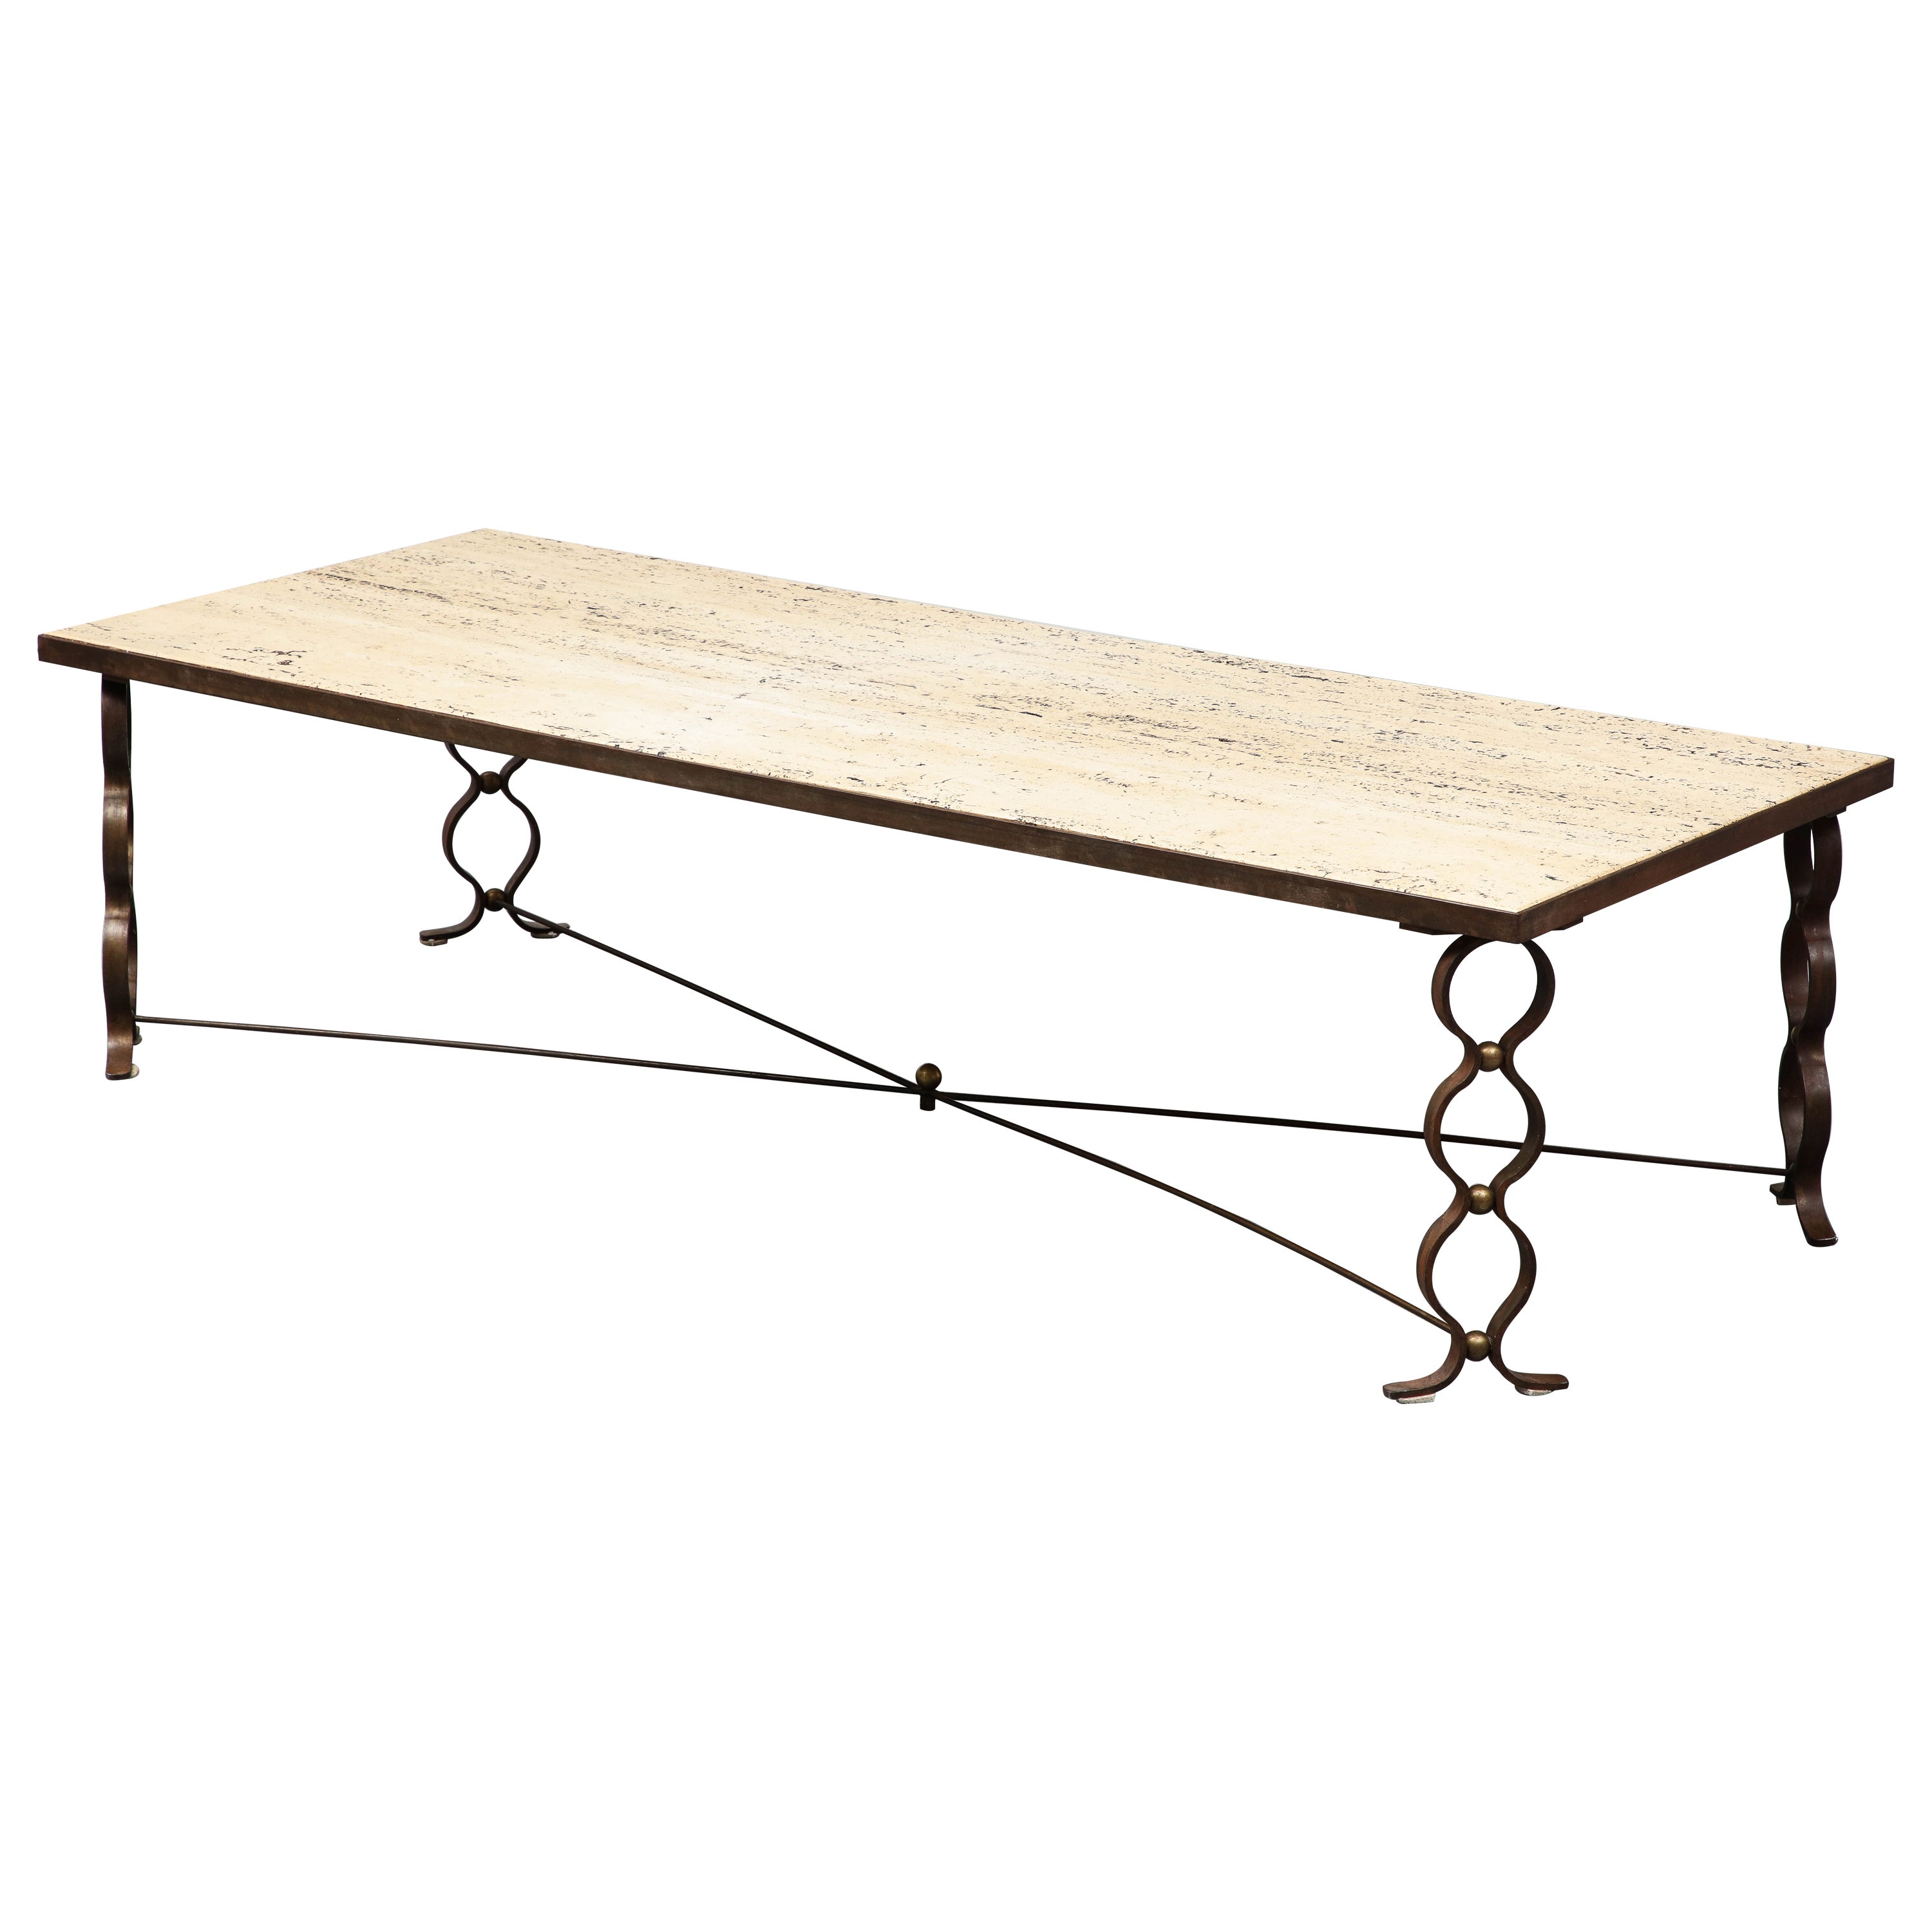 Wrought Iron and Comblanchien Limestone "Ruban" Coffee Table by Jean Royère For Sale